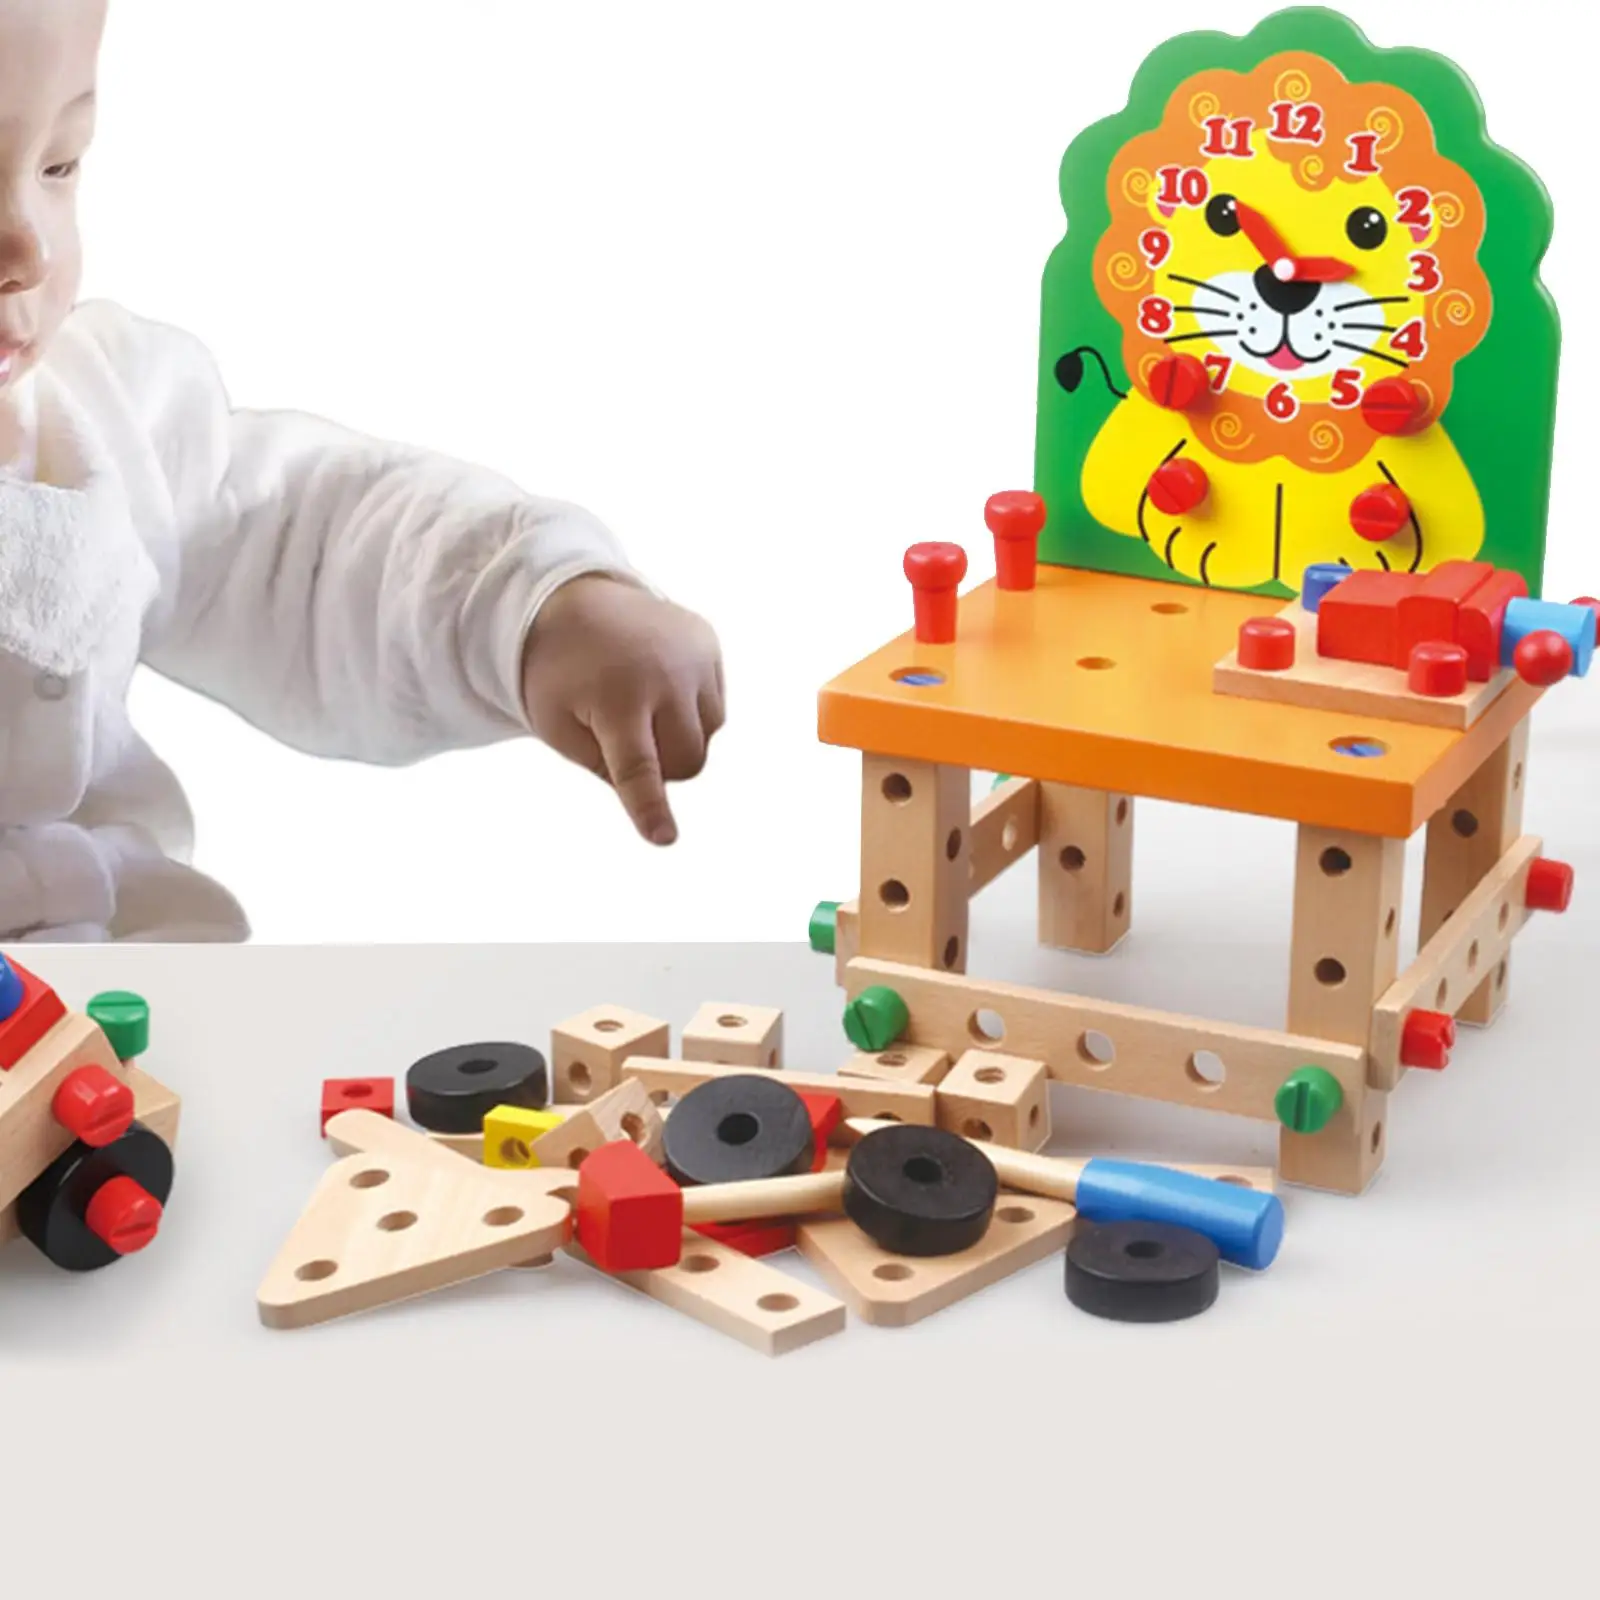 Wooden Chair Models Construction Play Set with Tools for Children Girls Boys